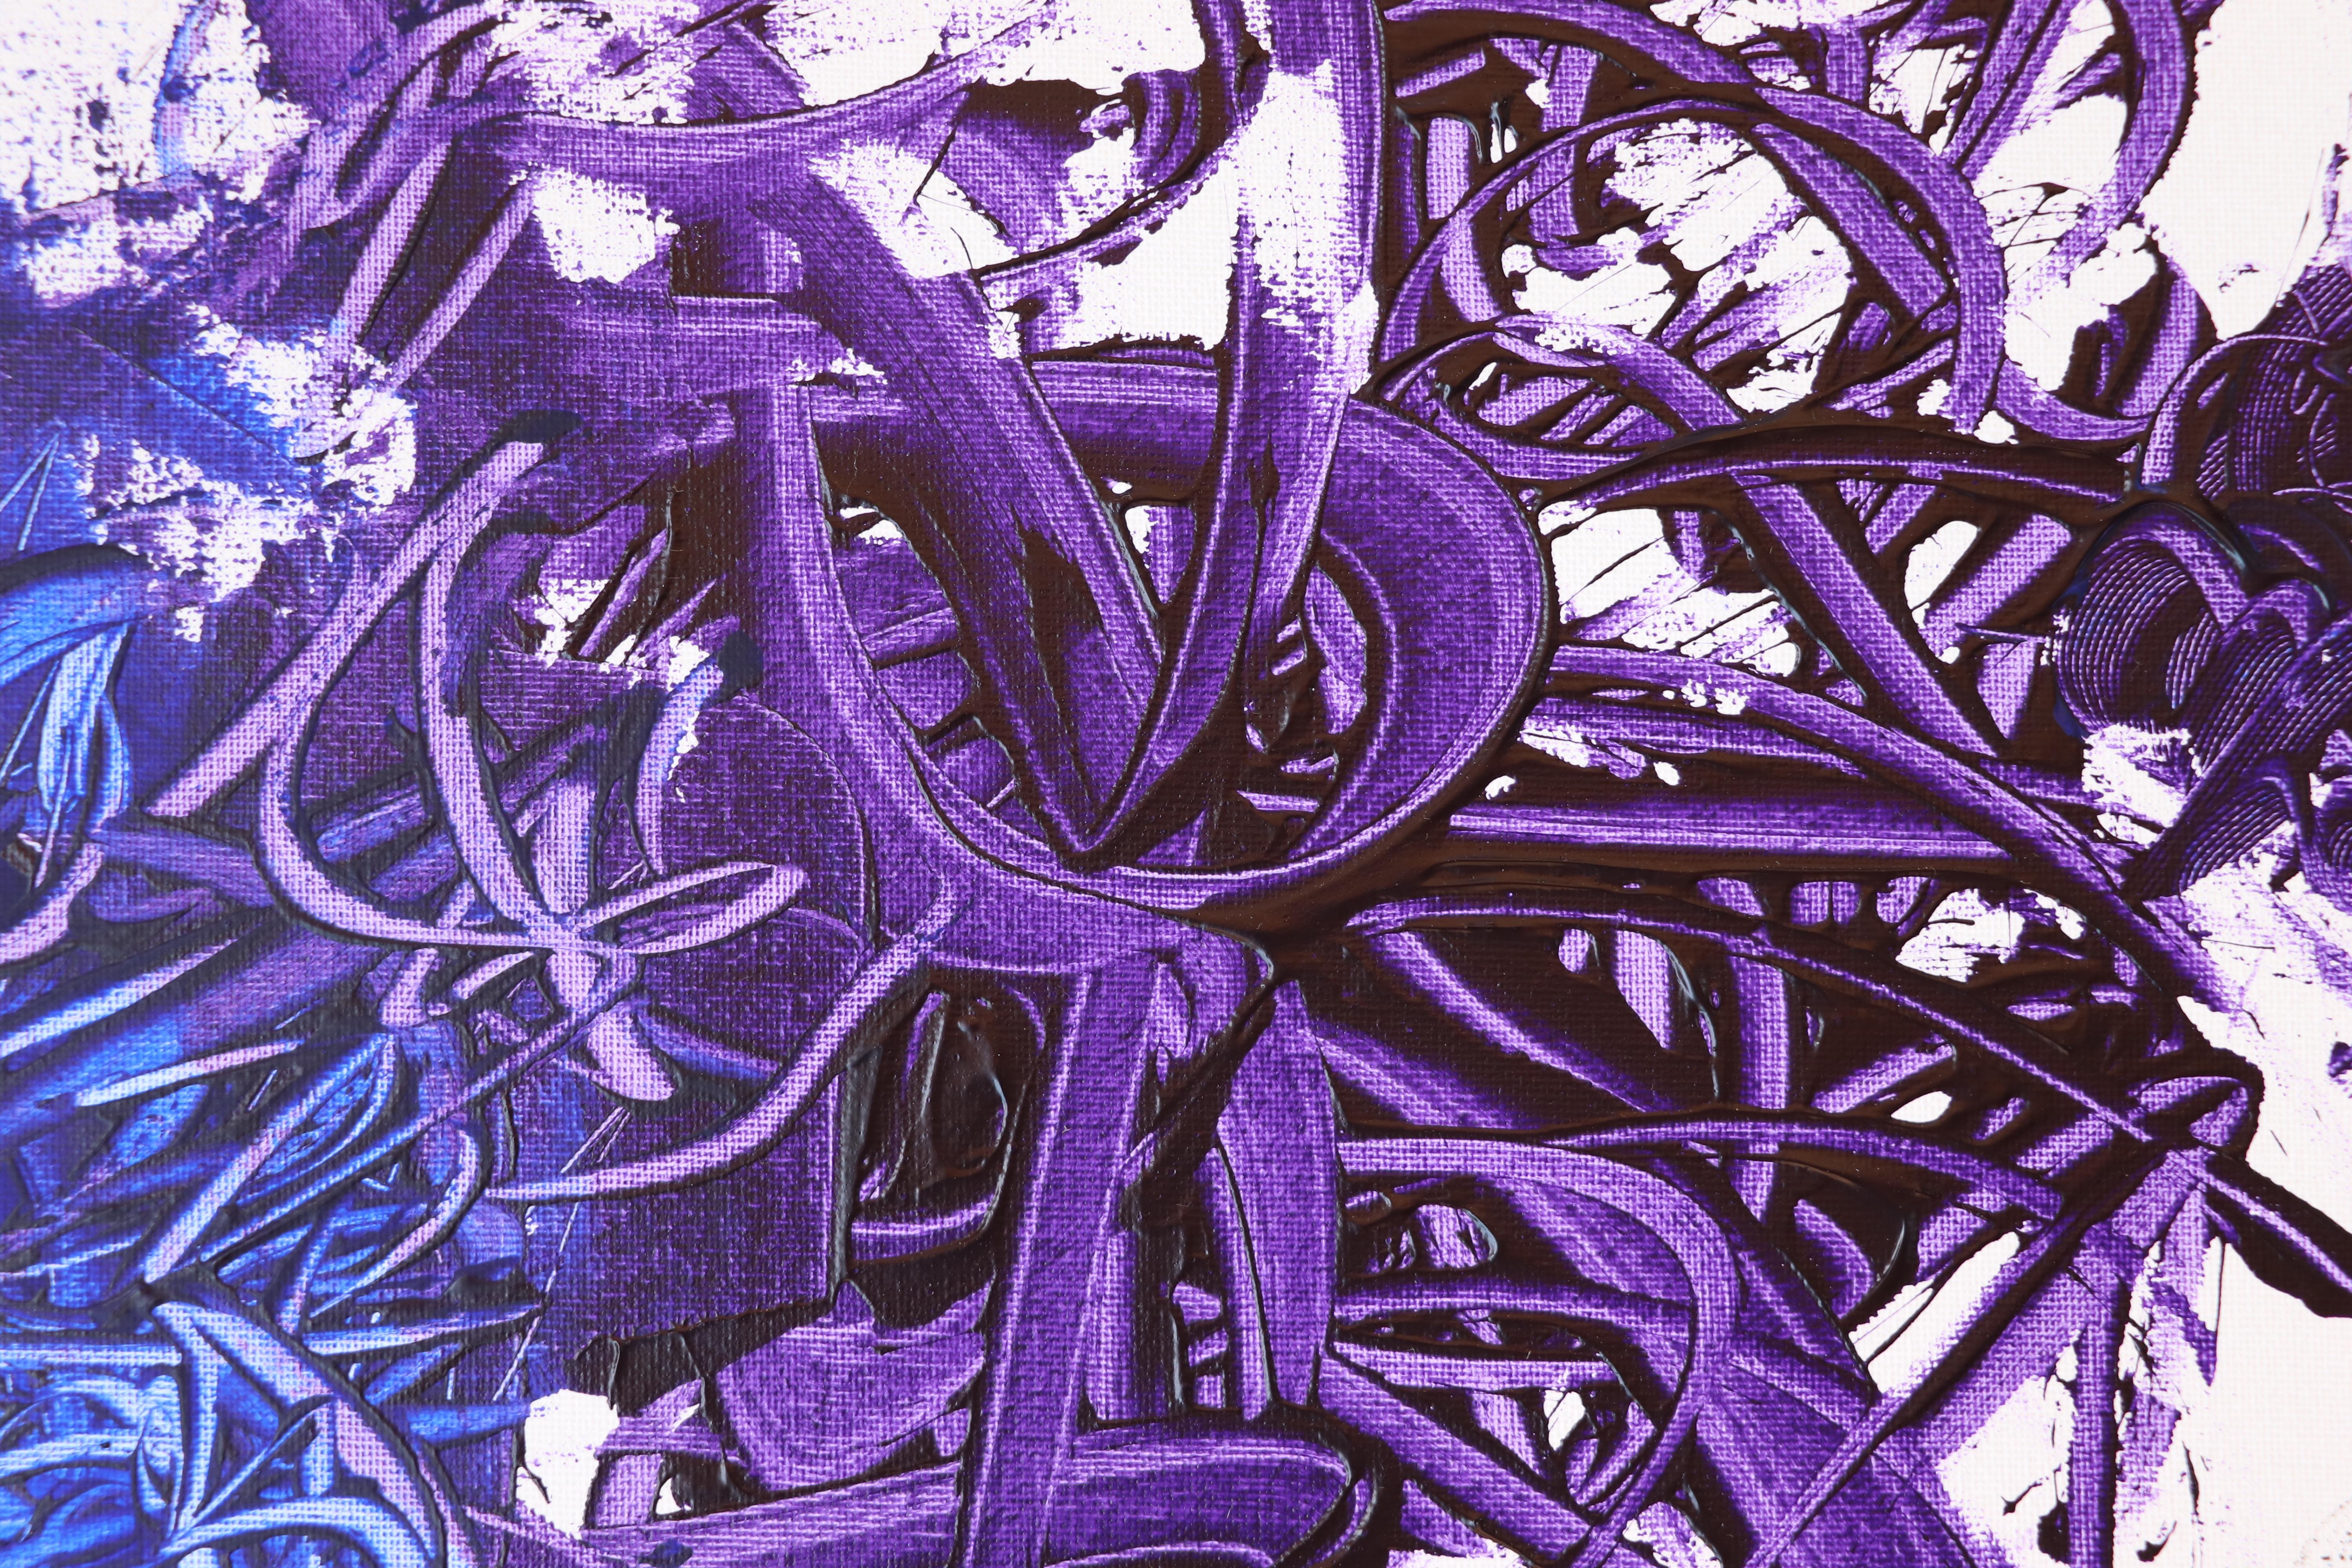 Surrealist Collection Number 6 - Purple Abstract Painting by Sax Berlin